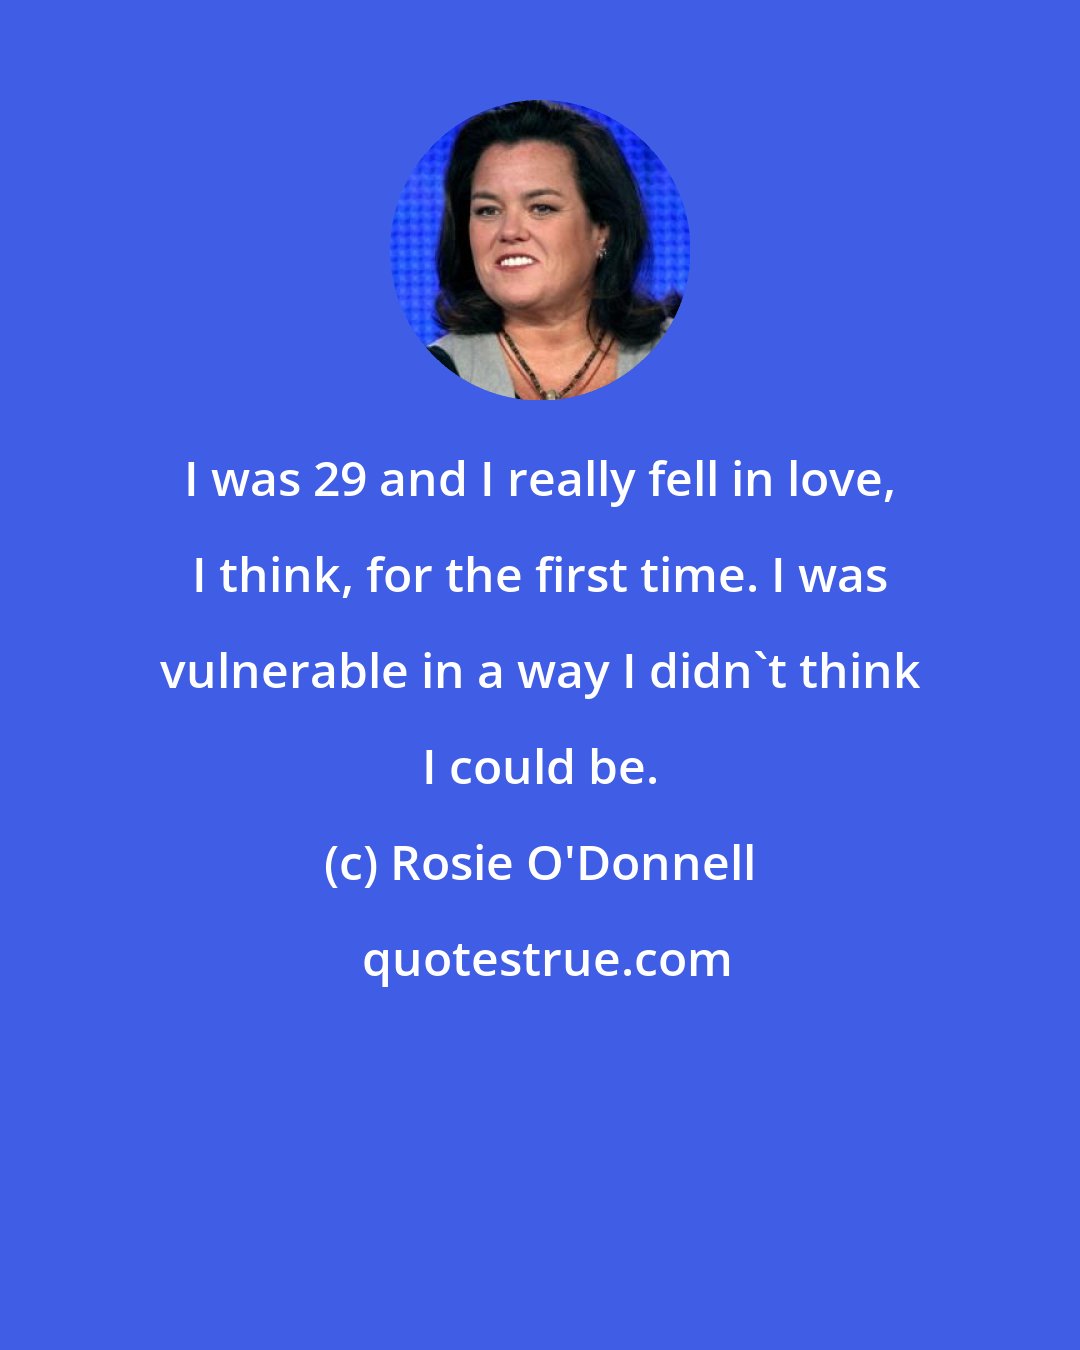 Rosie O'Donnell: I was 29 and I really fell in love, I think, for the first time. I was vulnerable in a way I didn't think I could be.